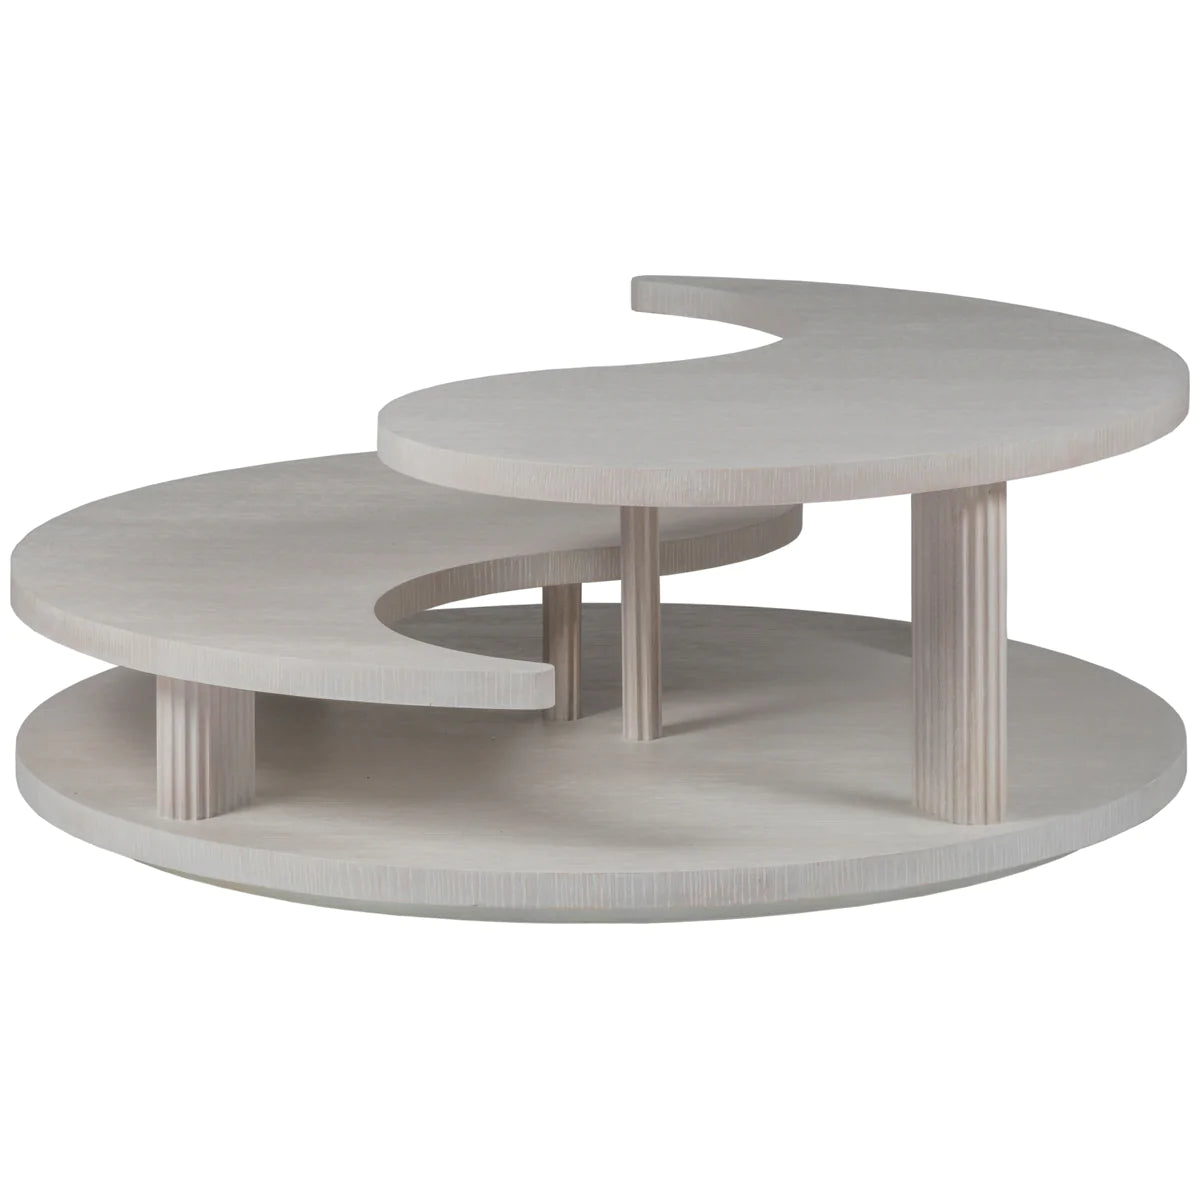 Artistica Home Signature Designs Misty Gray Yin Yang Cocktail Table